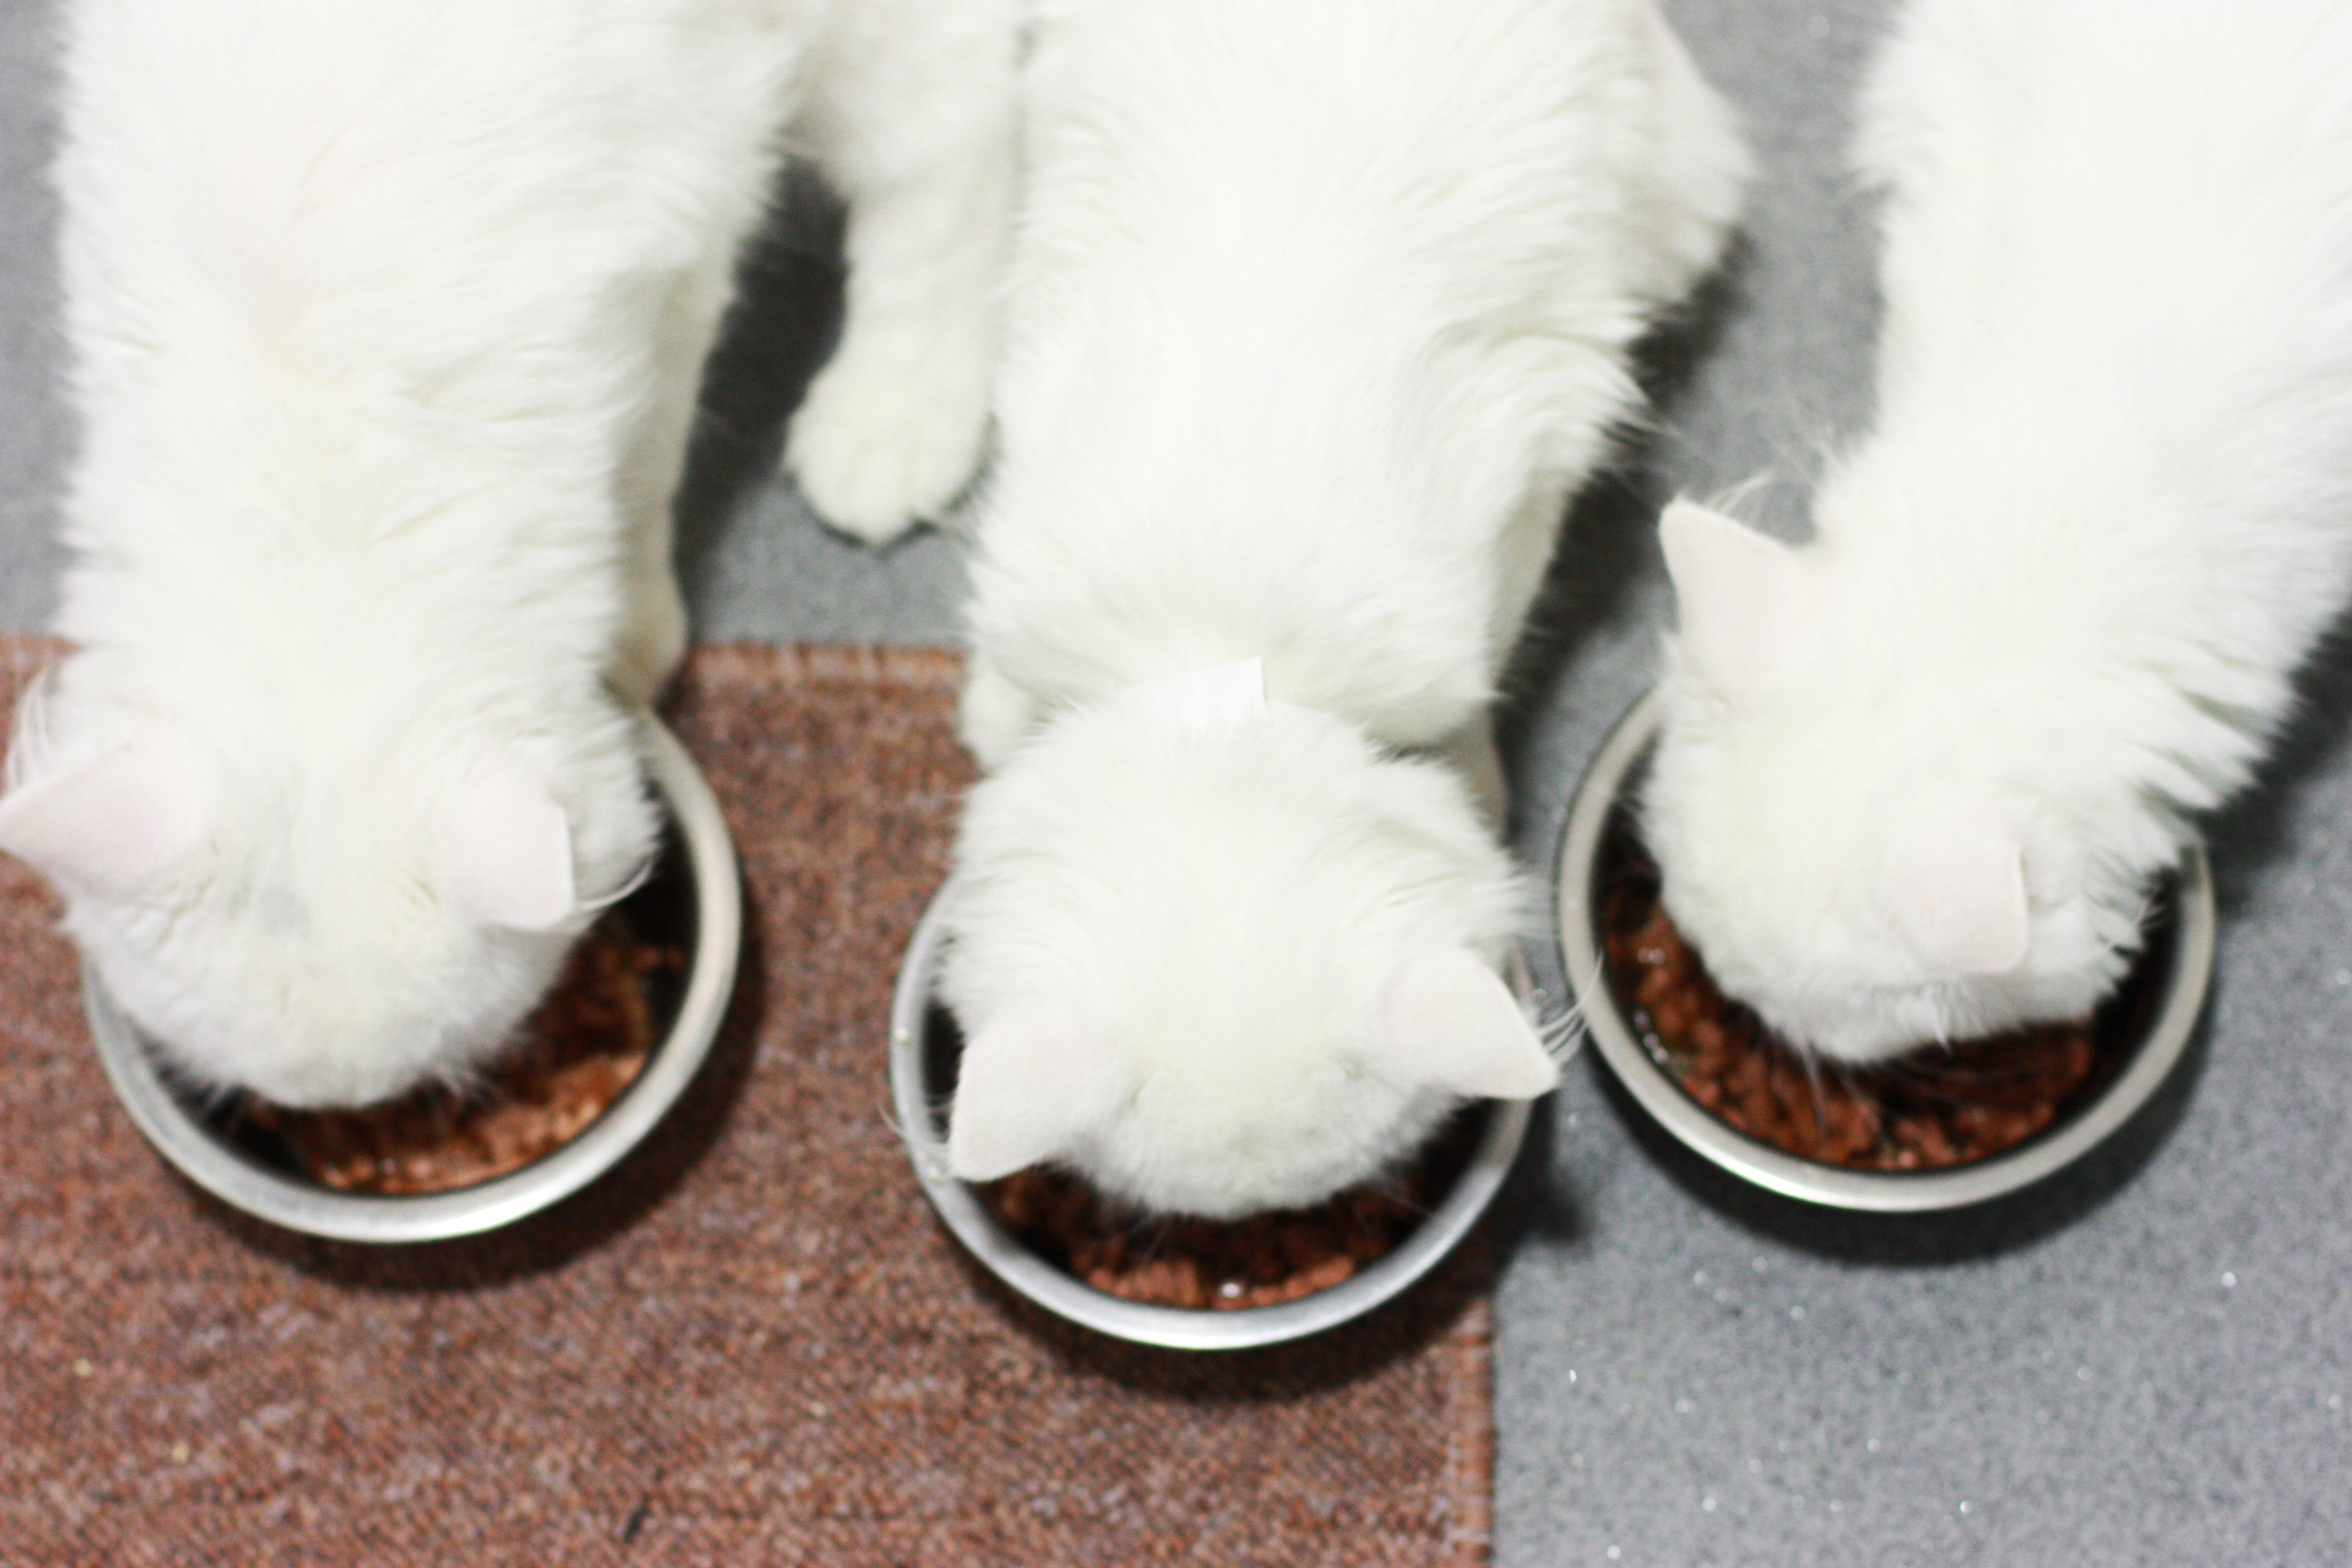 Feeding your cats in separate rooms may help them lose weight